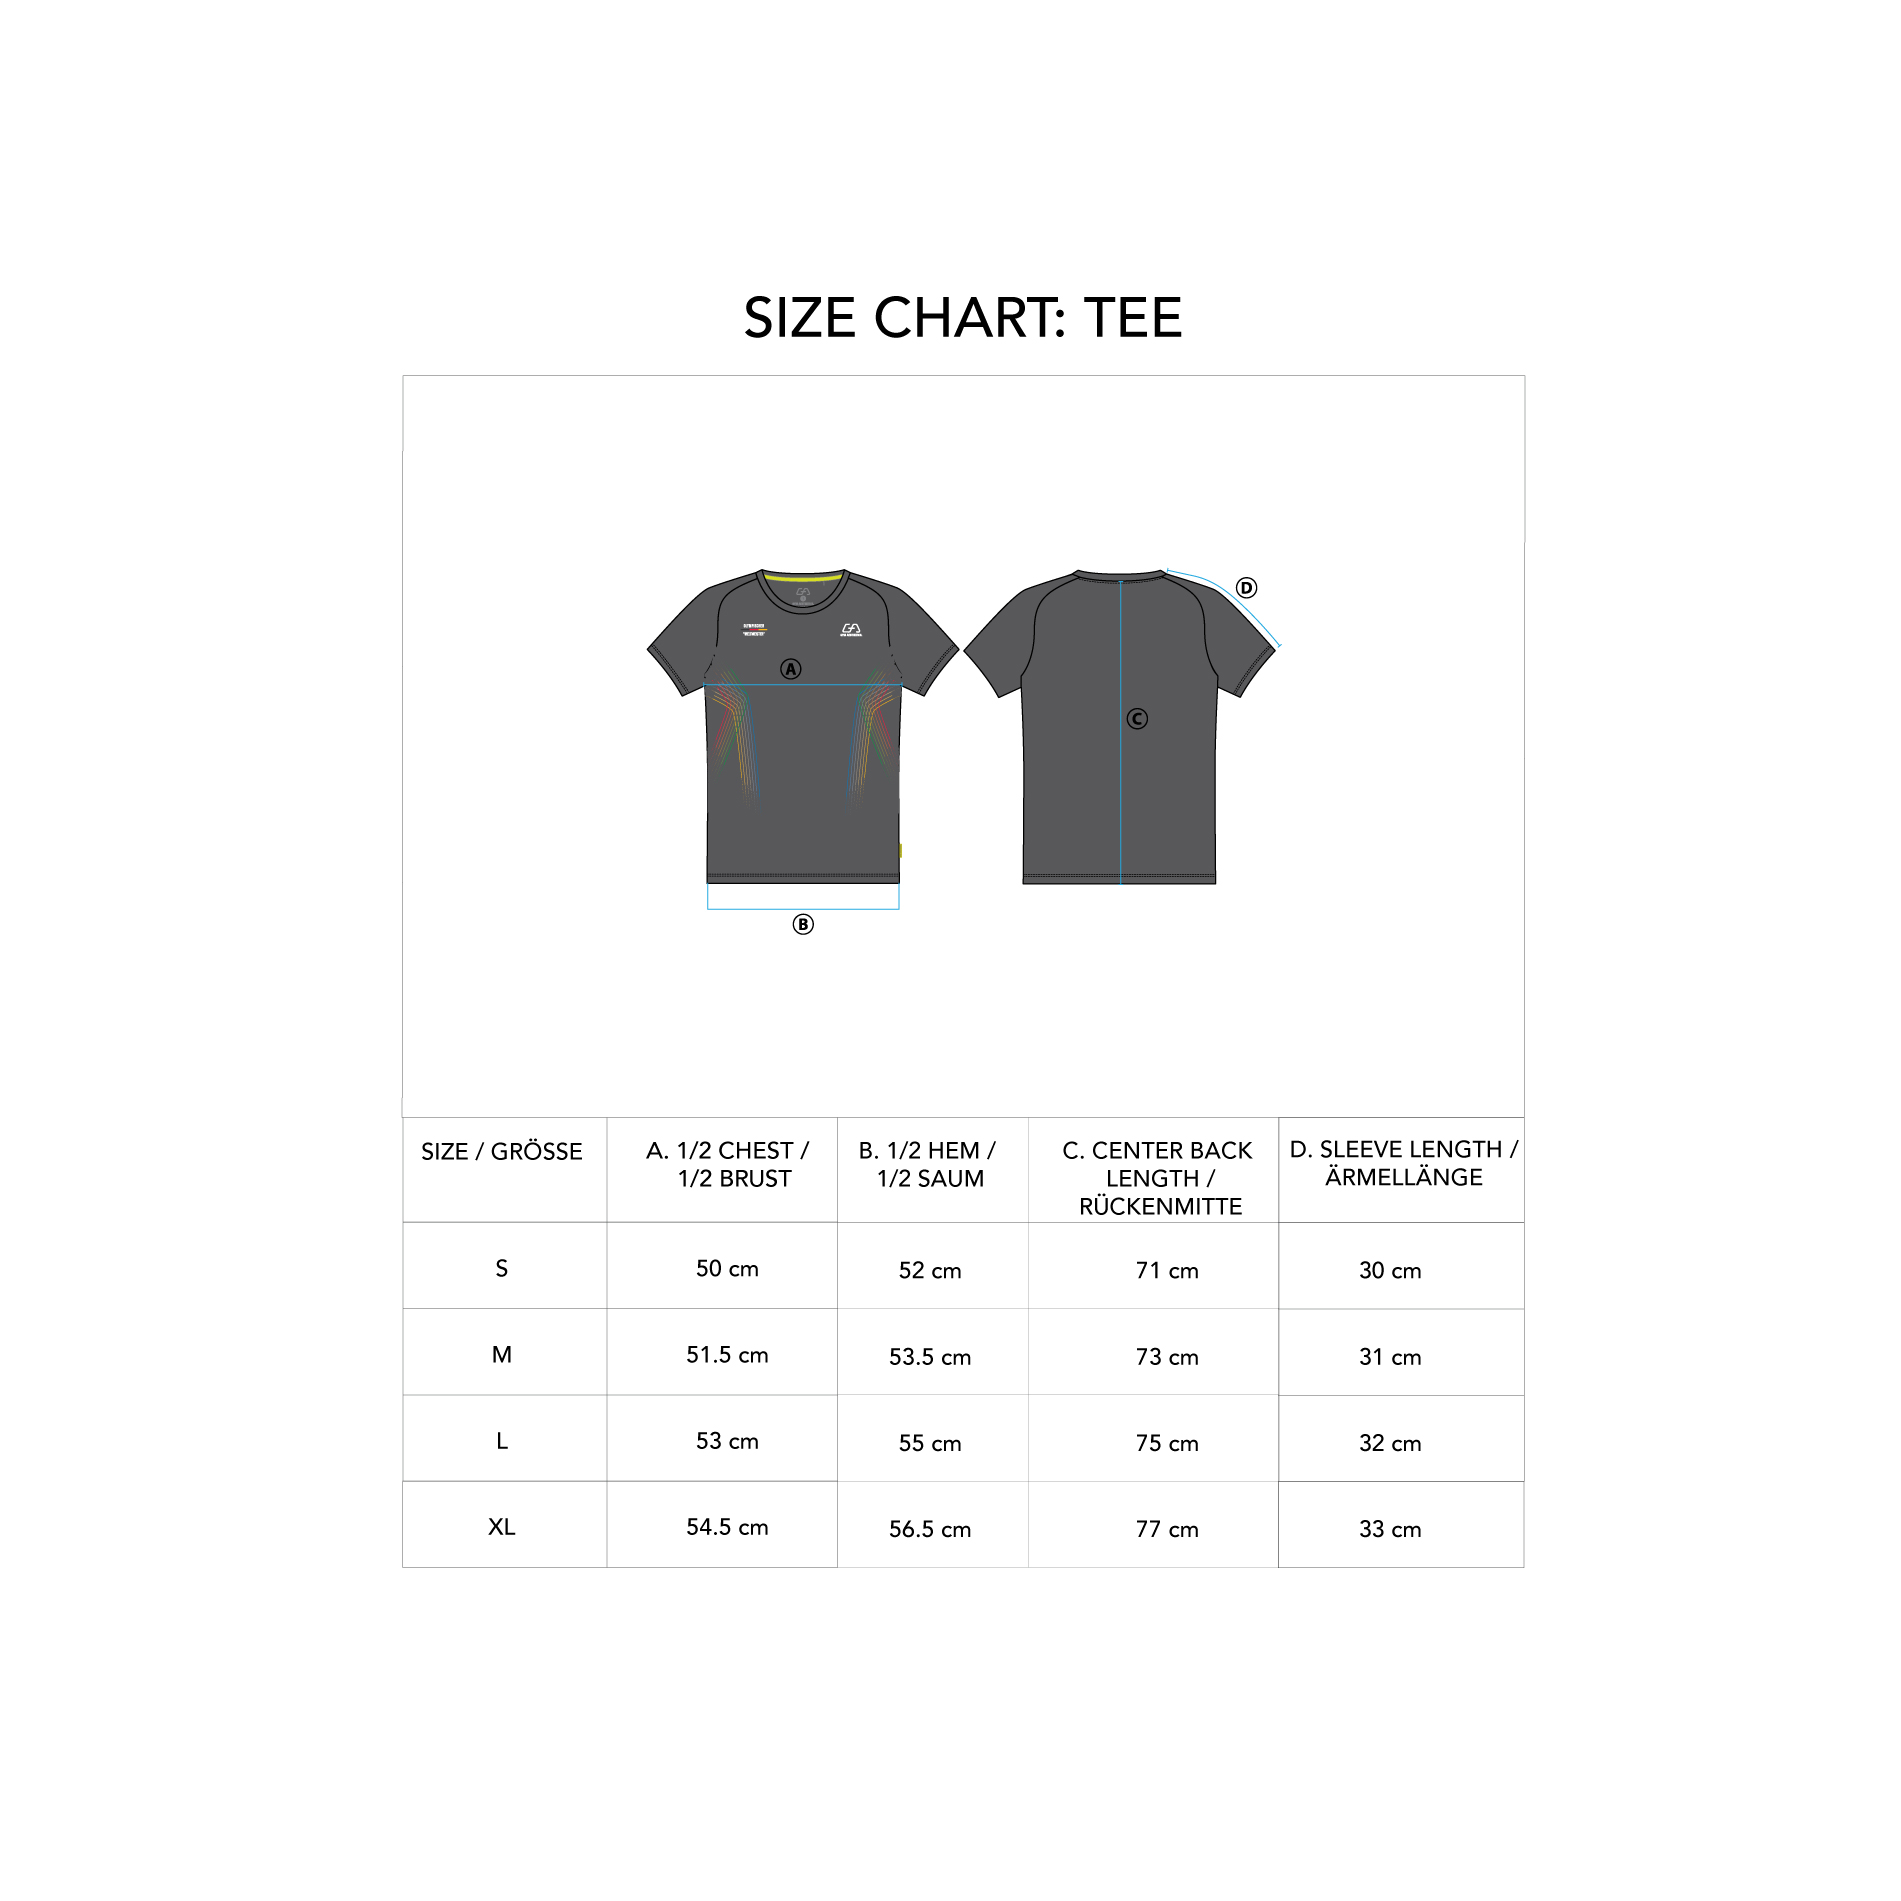 Essential Warrior Loose-Fit T-Shirt for Men - size chart